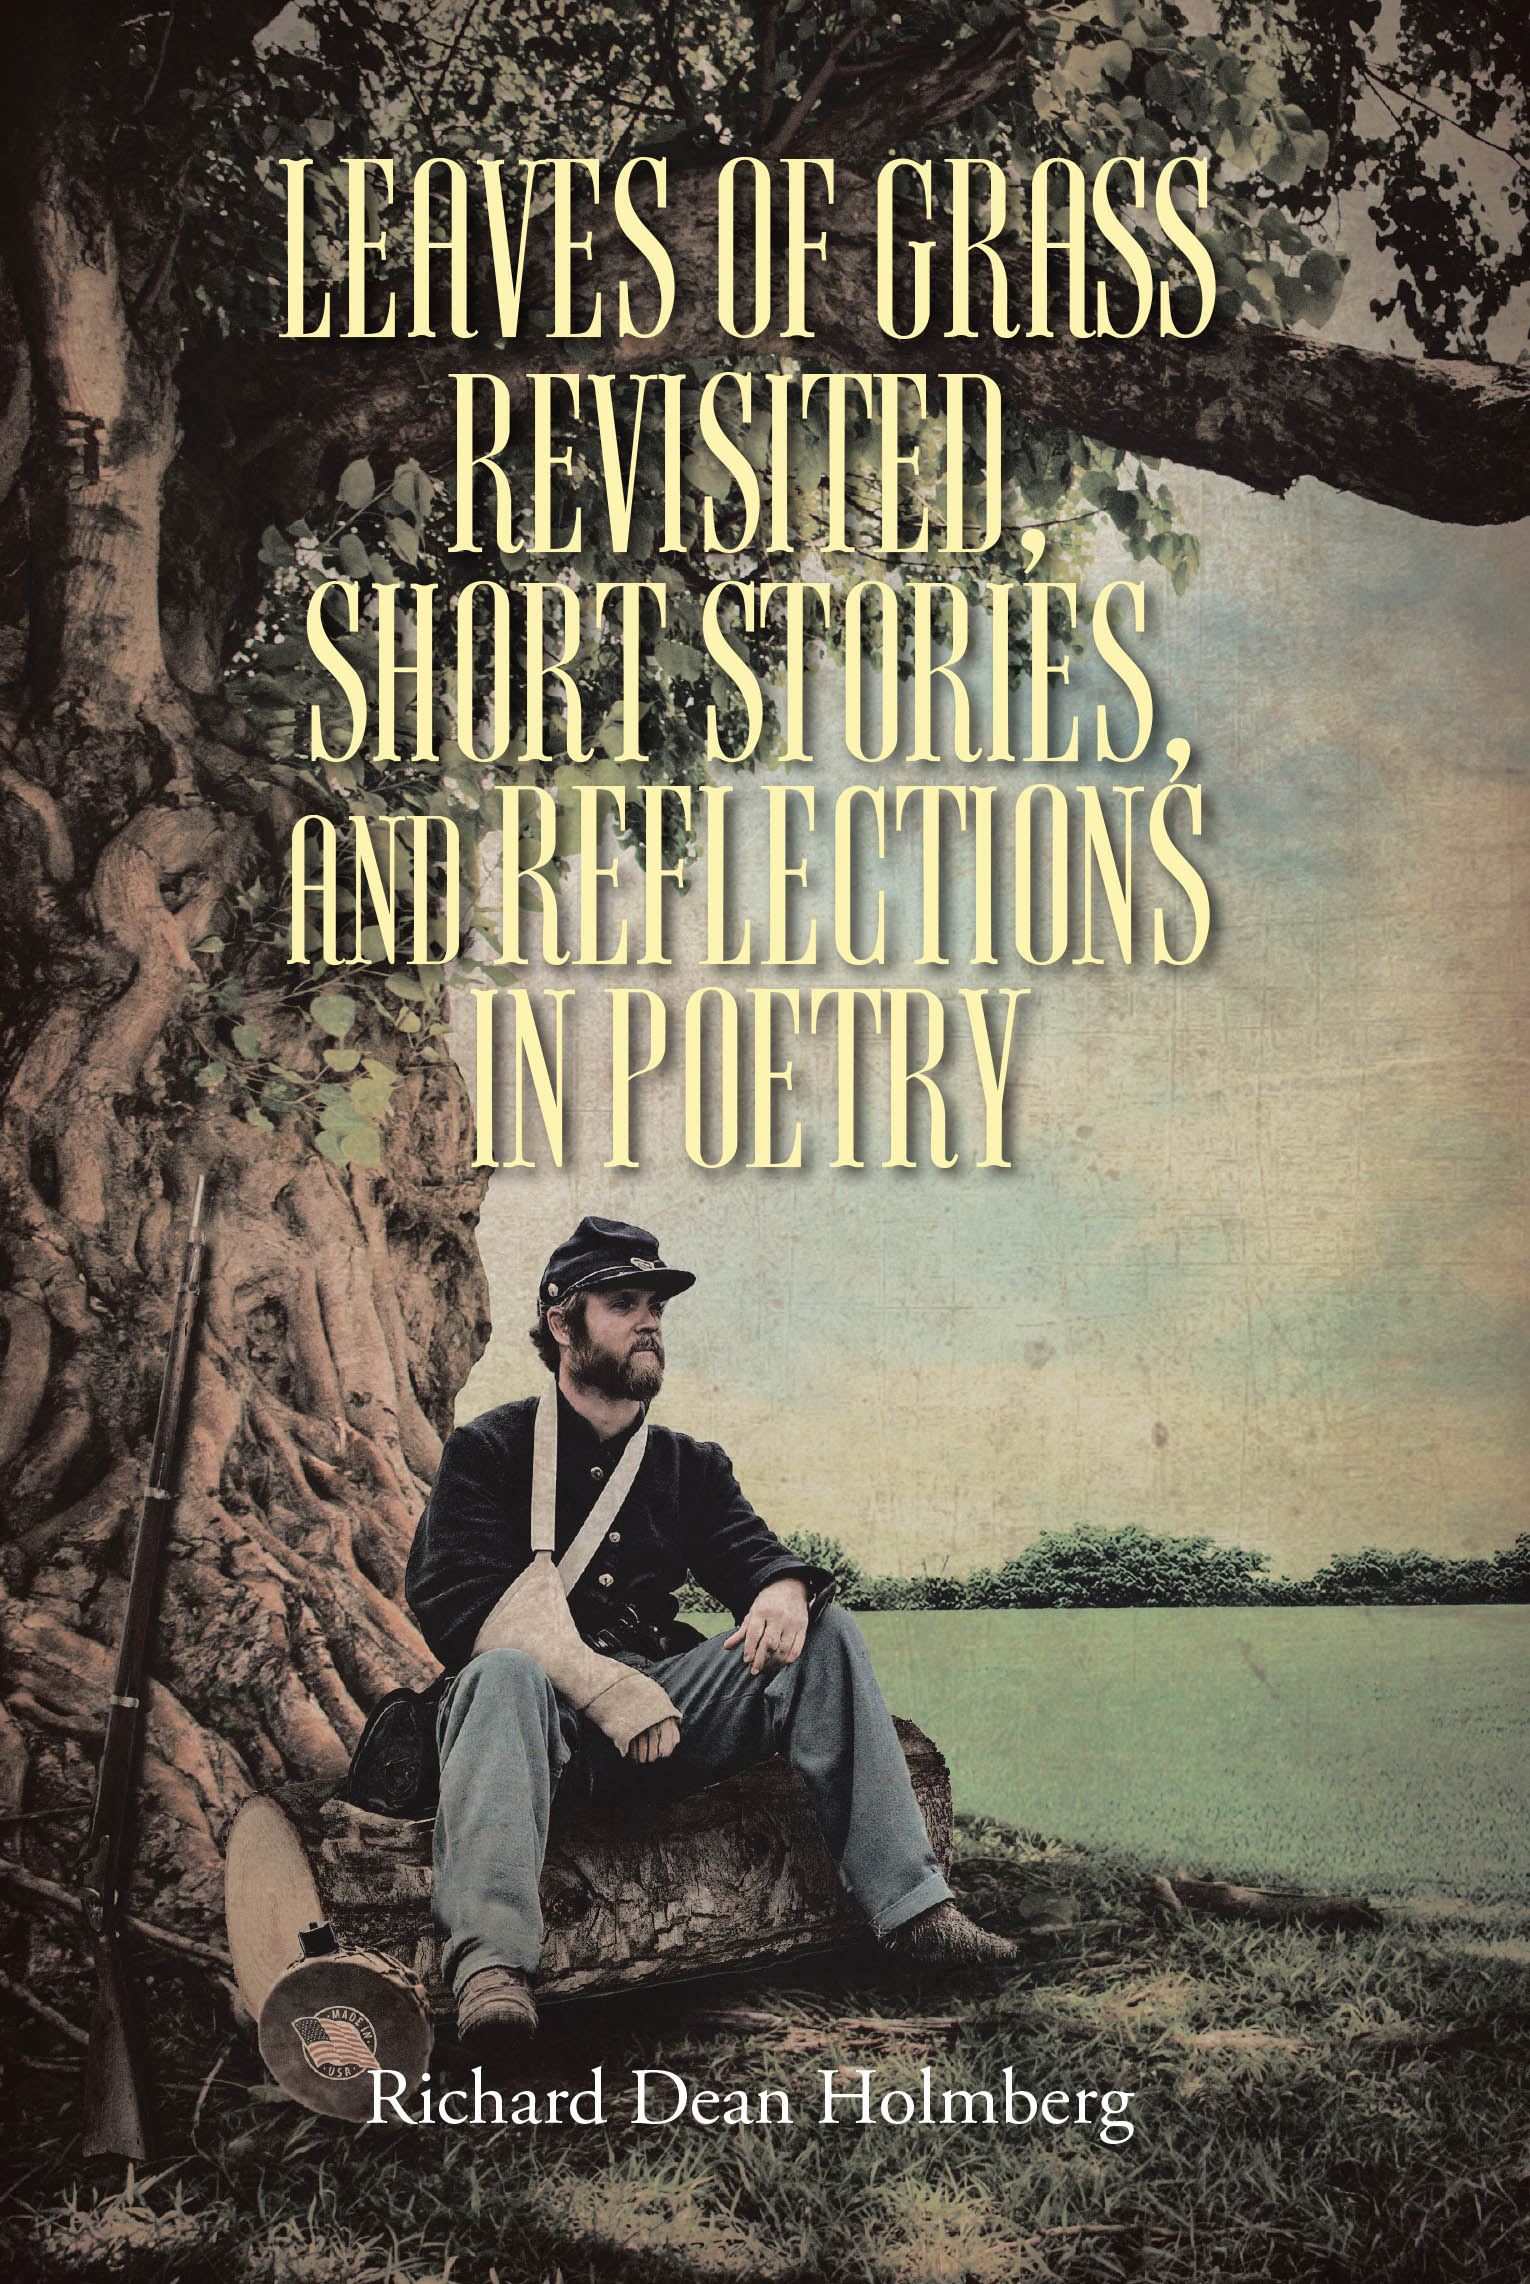 Richard Dean Holmberg’s Newly Released "Leaves of Grass Revisted, Short Stories, and Reflections in Poetry" is a Captivating and Thought-Provoking Collection